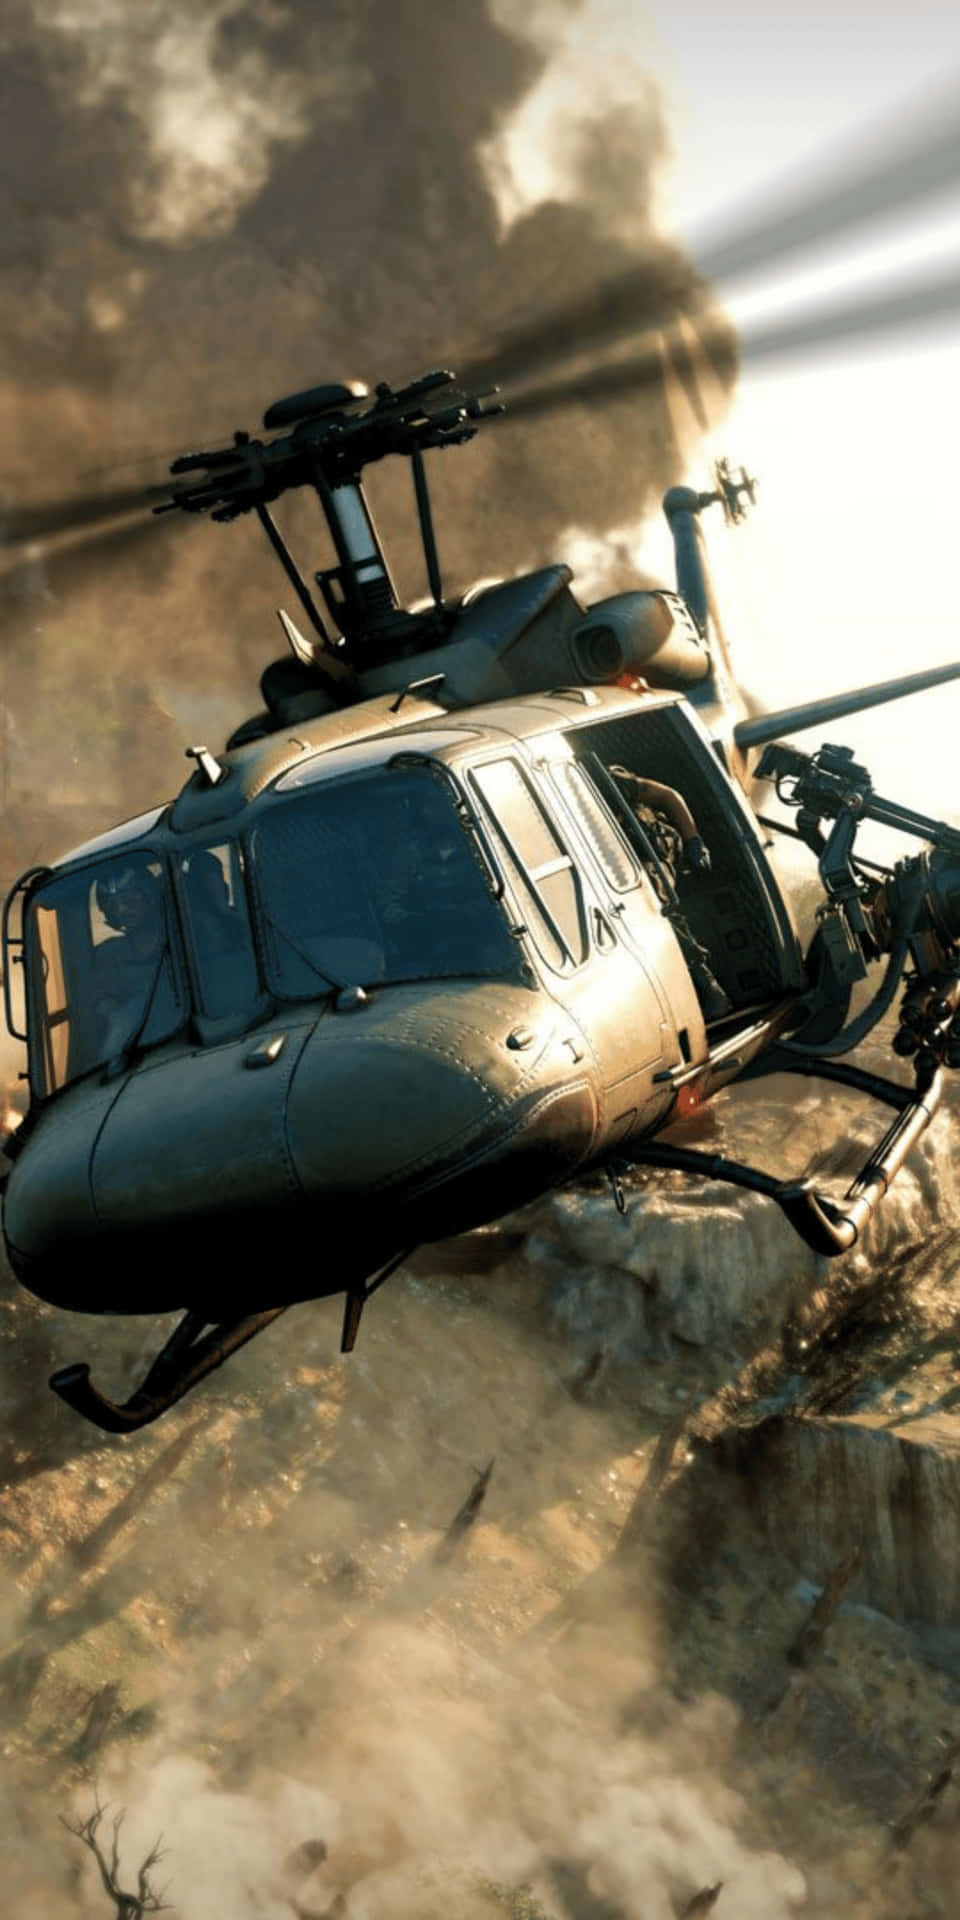 Pixel 3 Call Of Duty Black Ops Cold War Background Of Helicopter